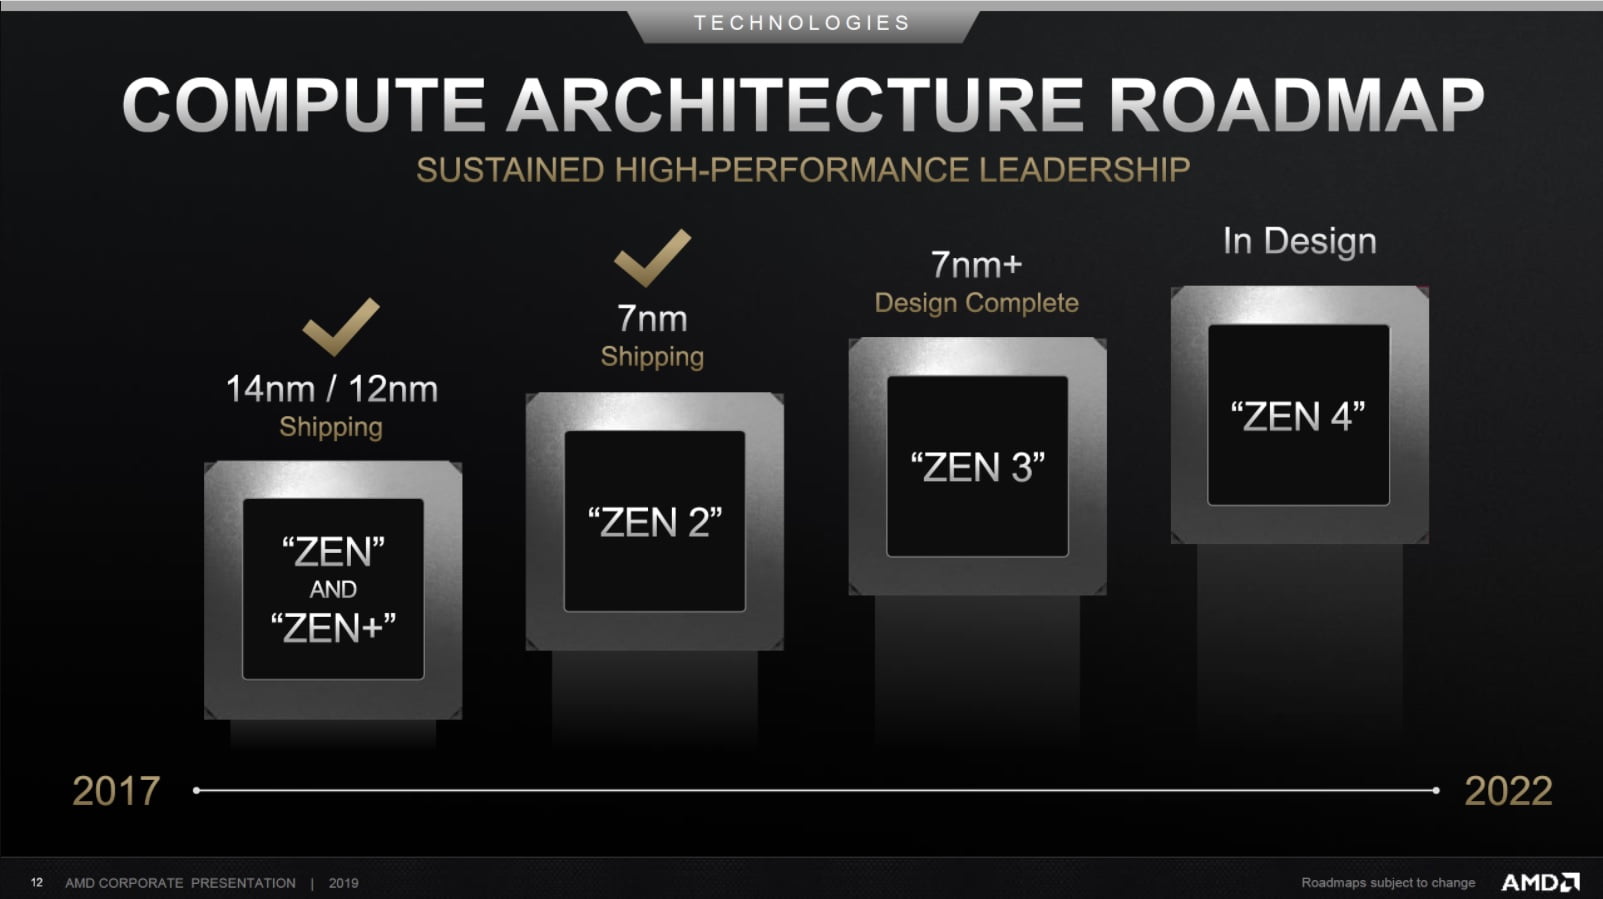 AMD introduced Zen 3 architecture